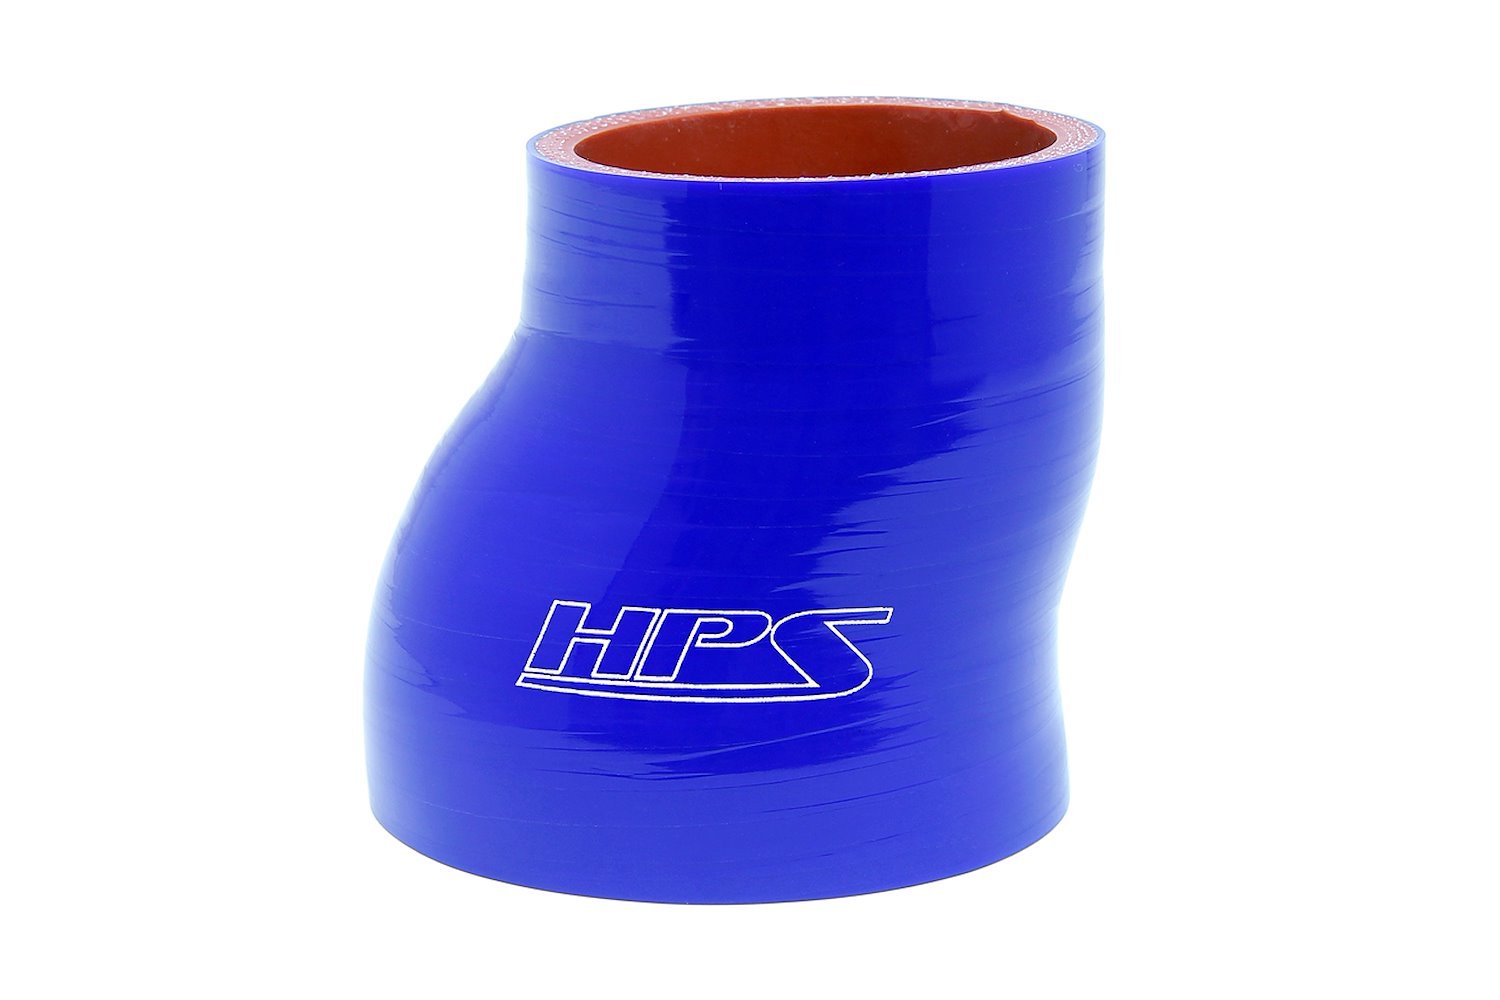 HTSOR-300-400-L4-BLUE Silicone Offset Reducer Hose, High-Temp Reinforced, 3 in. - 4 in. ID, 4 in. Long, Blue